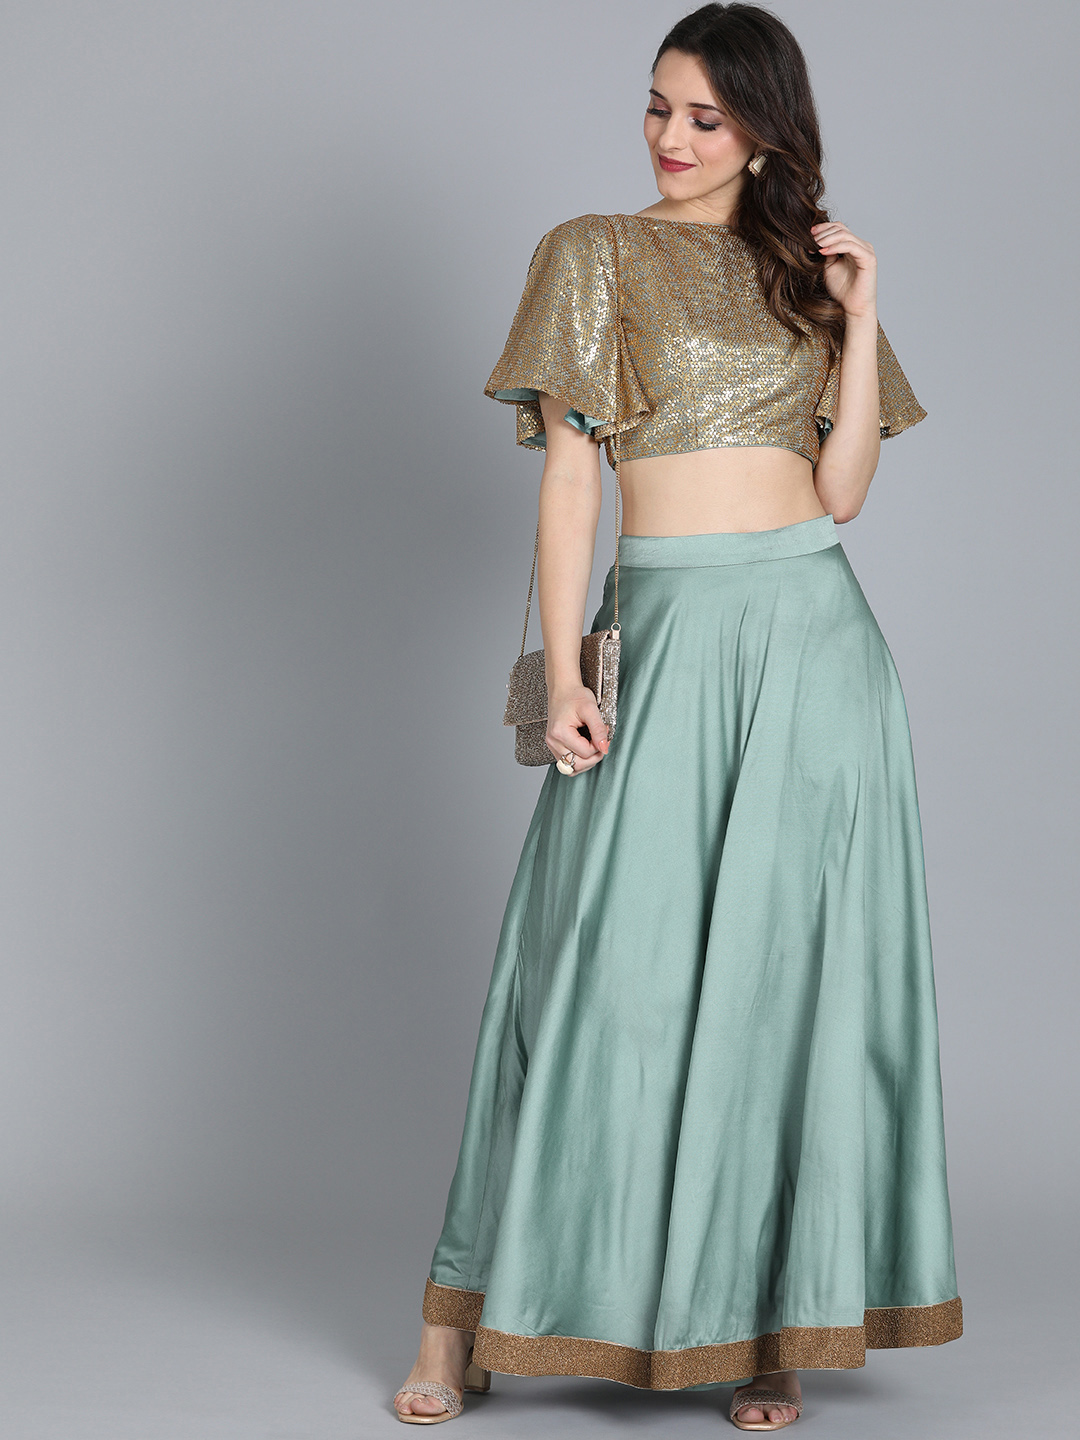 Bollywood Vogue Teal Green & Gold-Toned Made to Measure Embellished Lehenga with Blouse Price in India